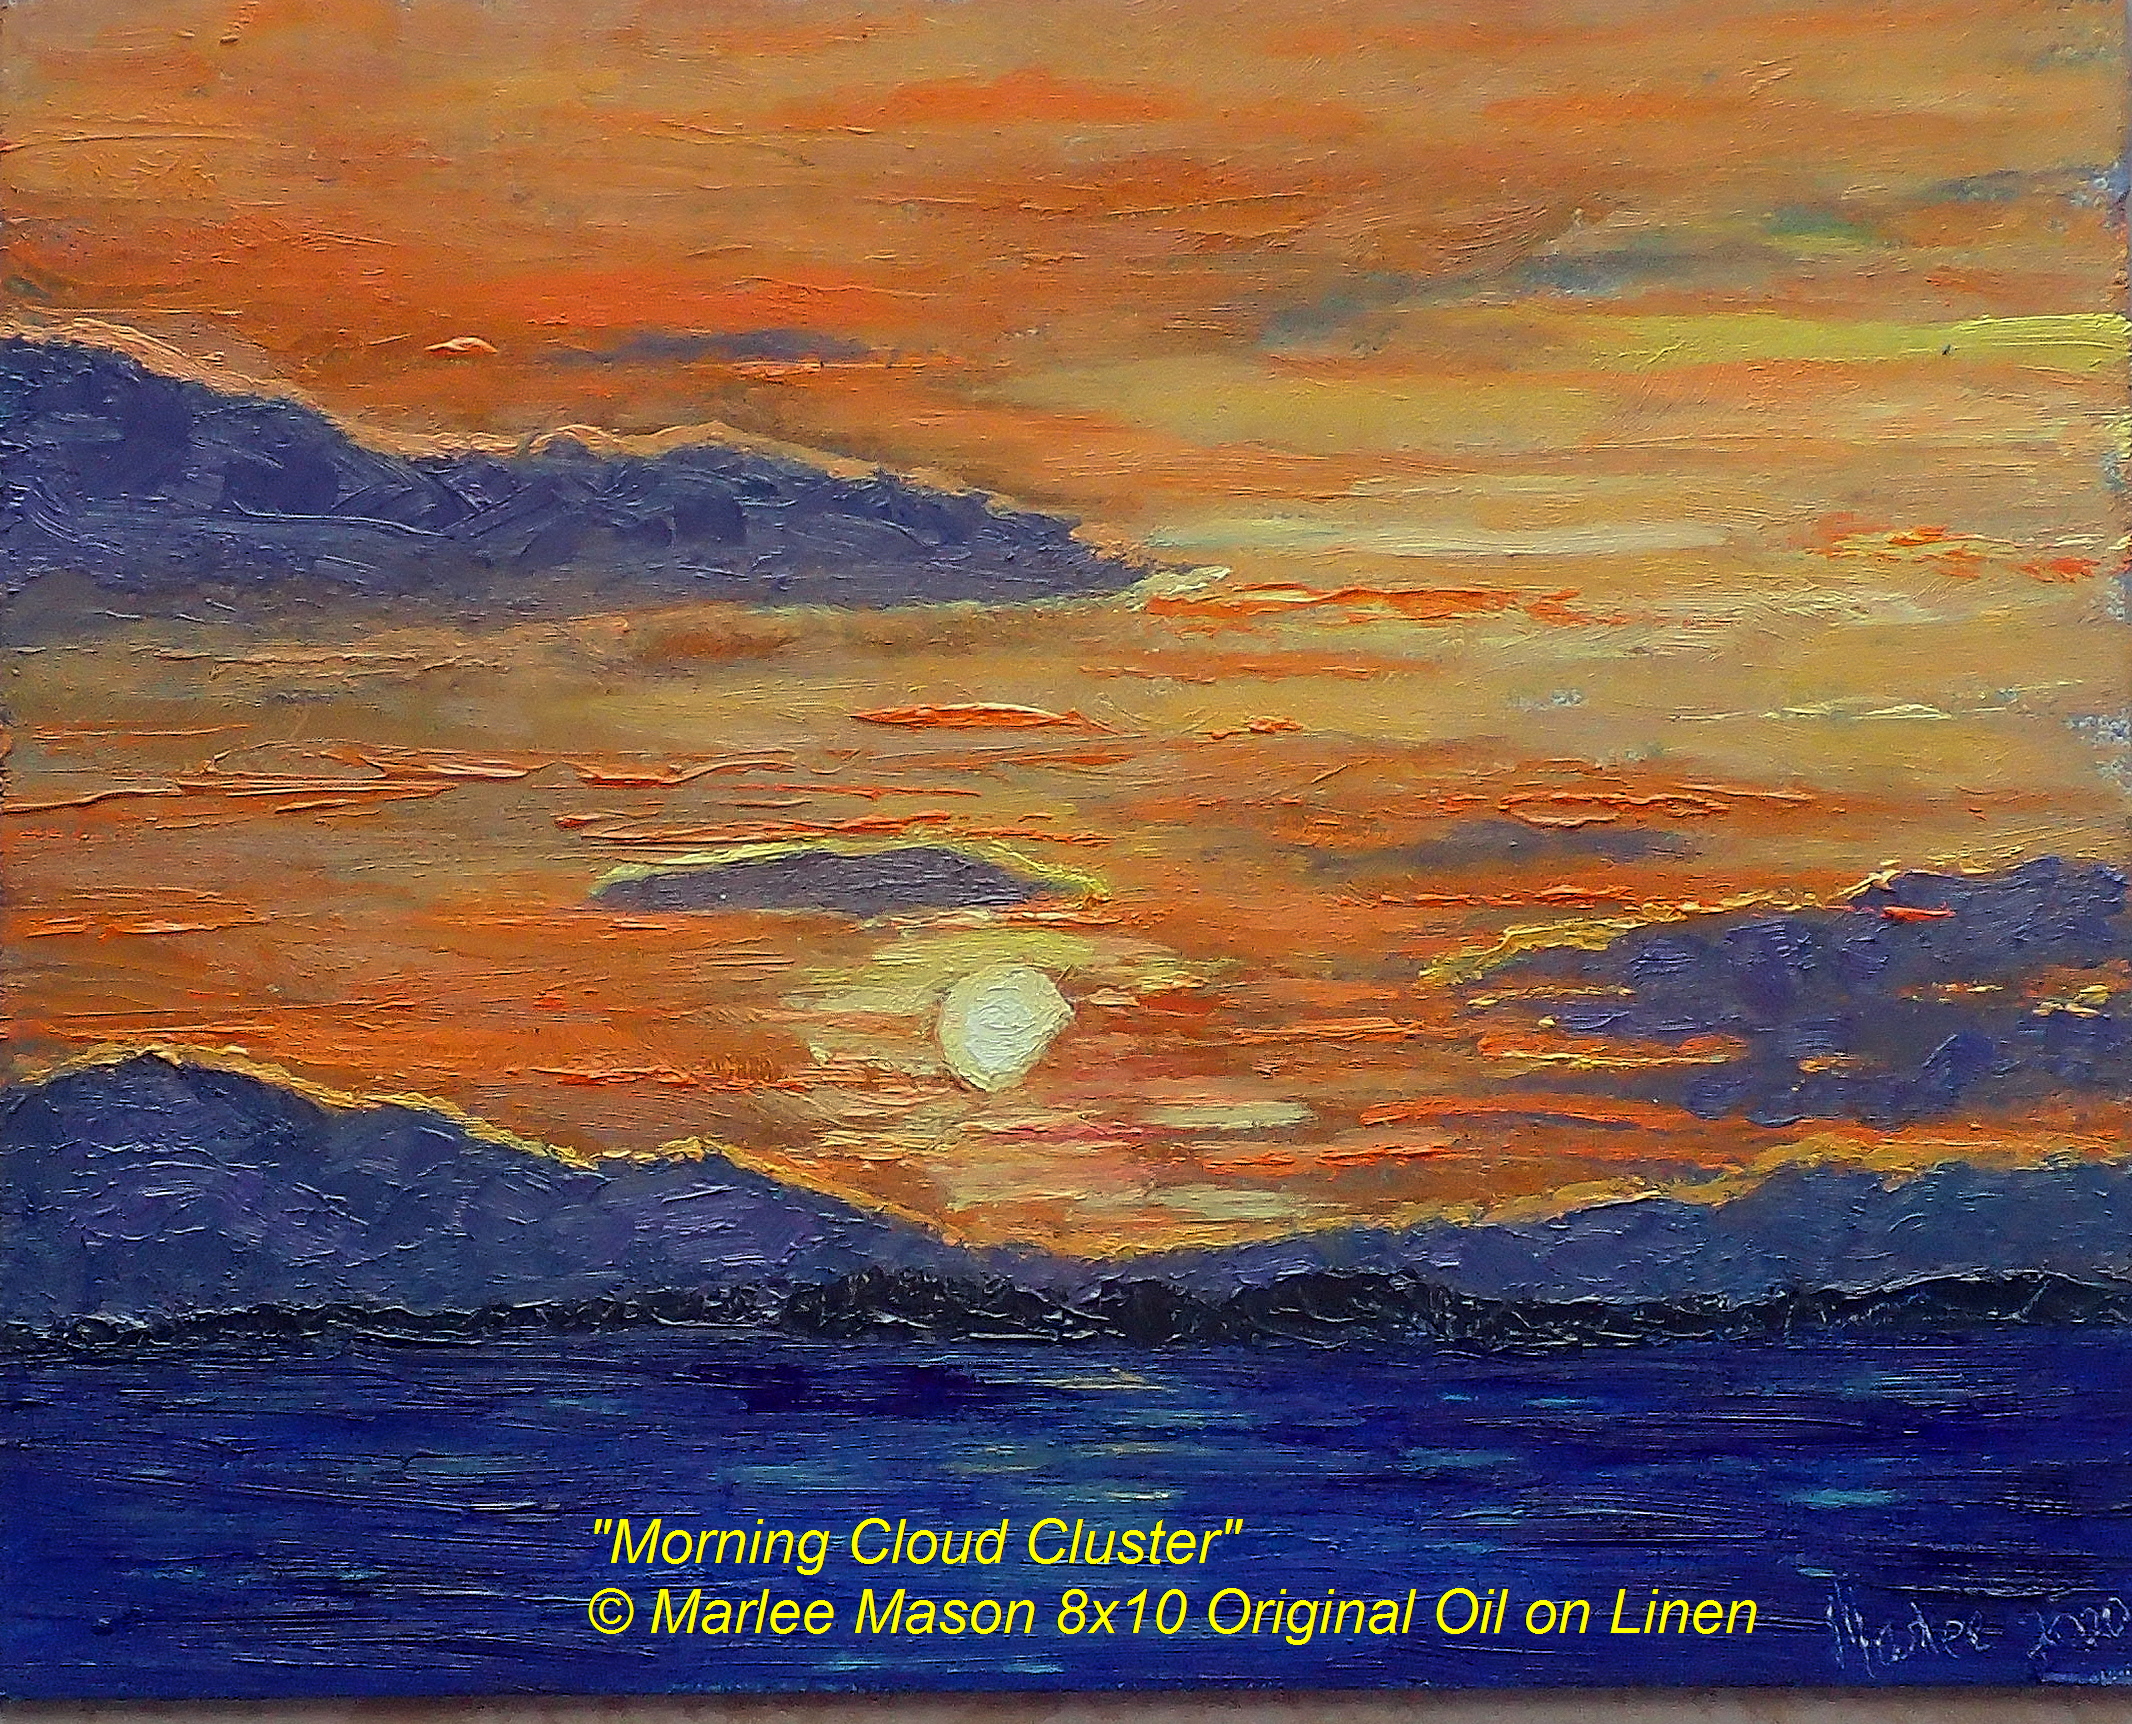 Original oil on linen board 8x10"   Every day I walk at sunrise.  I am often welcomed by the beautiful sunrise as I travel from dark to light with each day a creation by God as unique as each person i